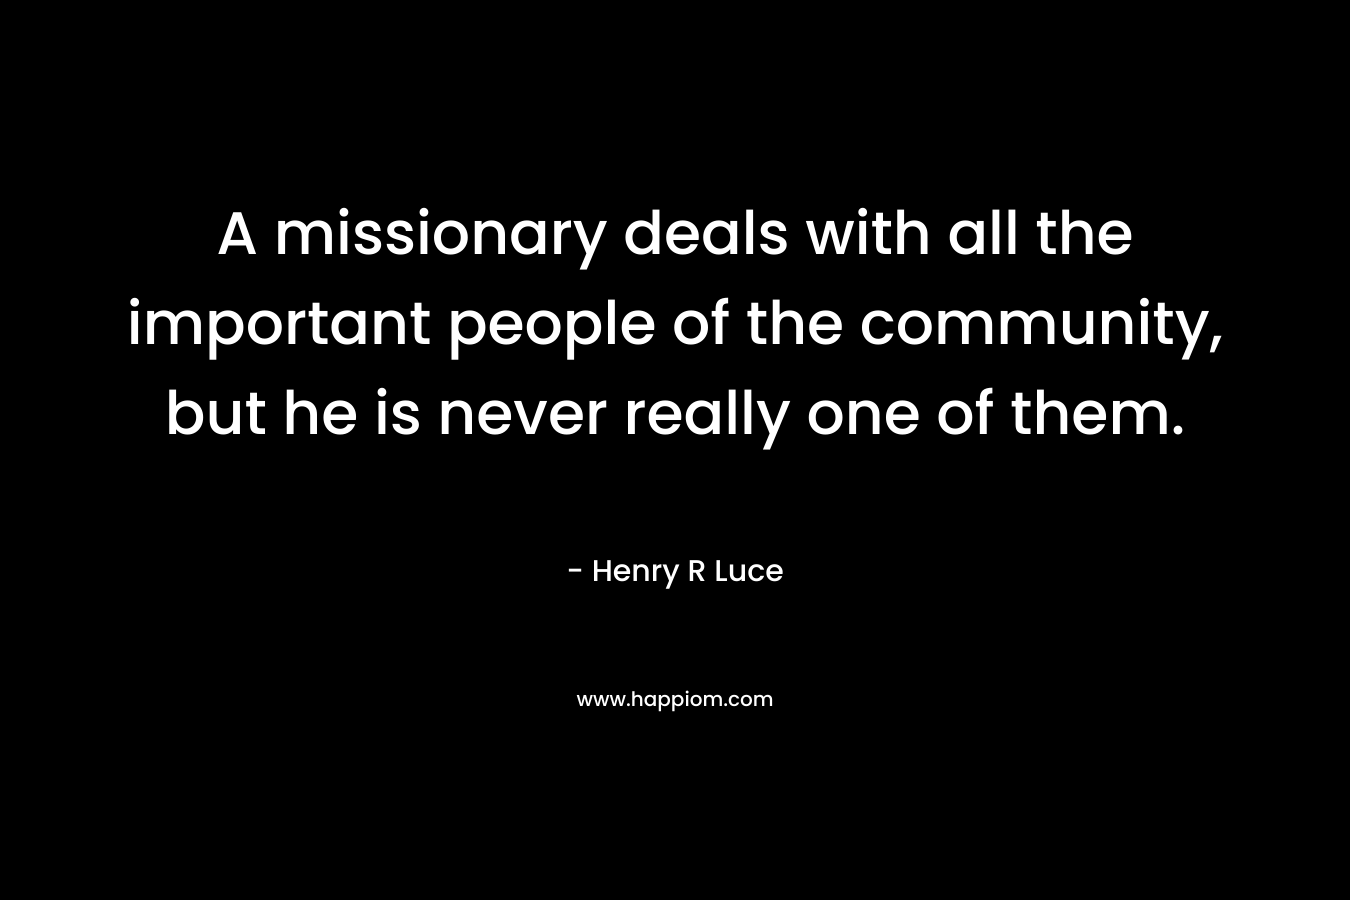 A missionary deals with all the important people of the community, but he is never really one of them.